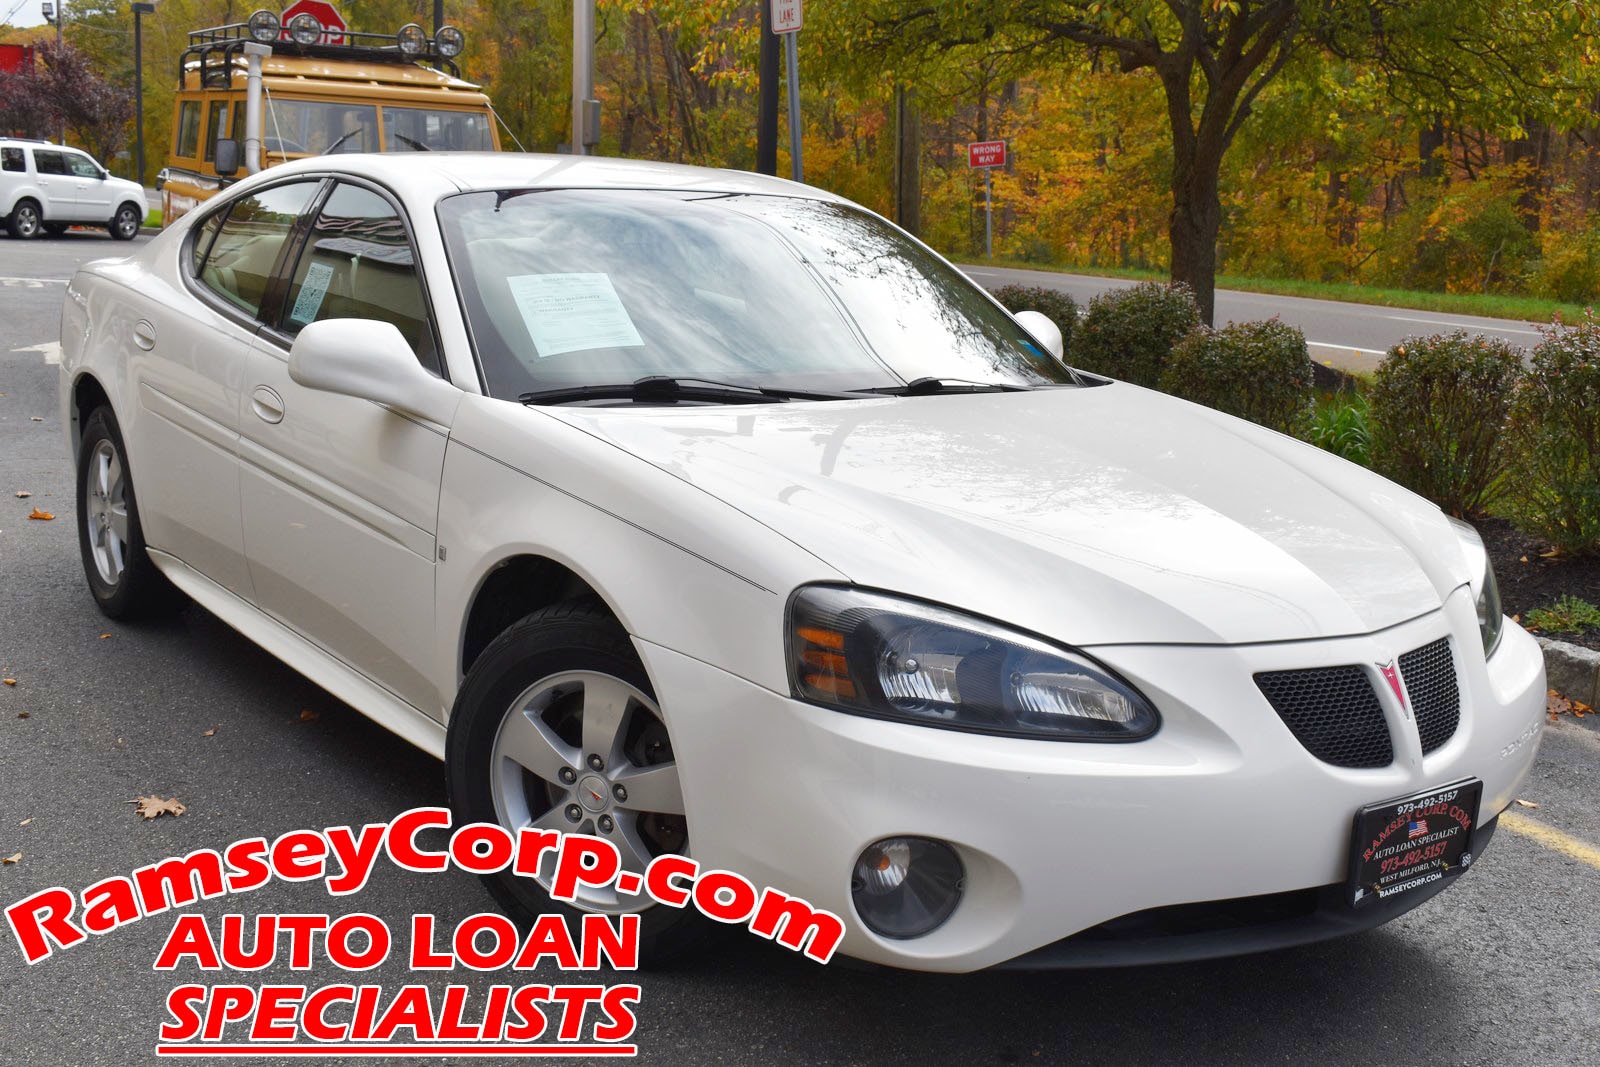 Used 2008 Pontiac Grand Prix For Sale at Ramsey Corp. | VIN:  2G2WP552681189397